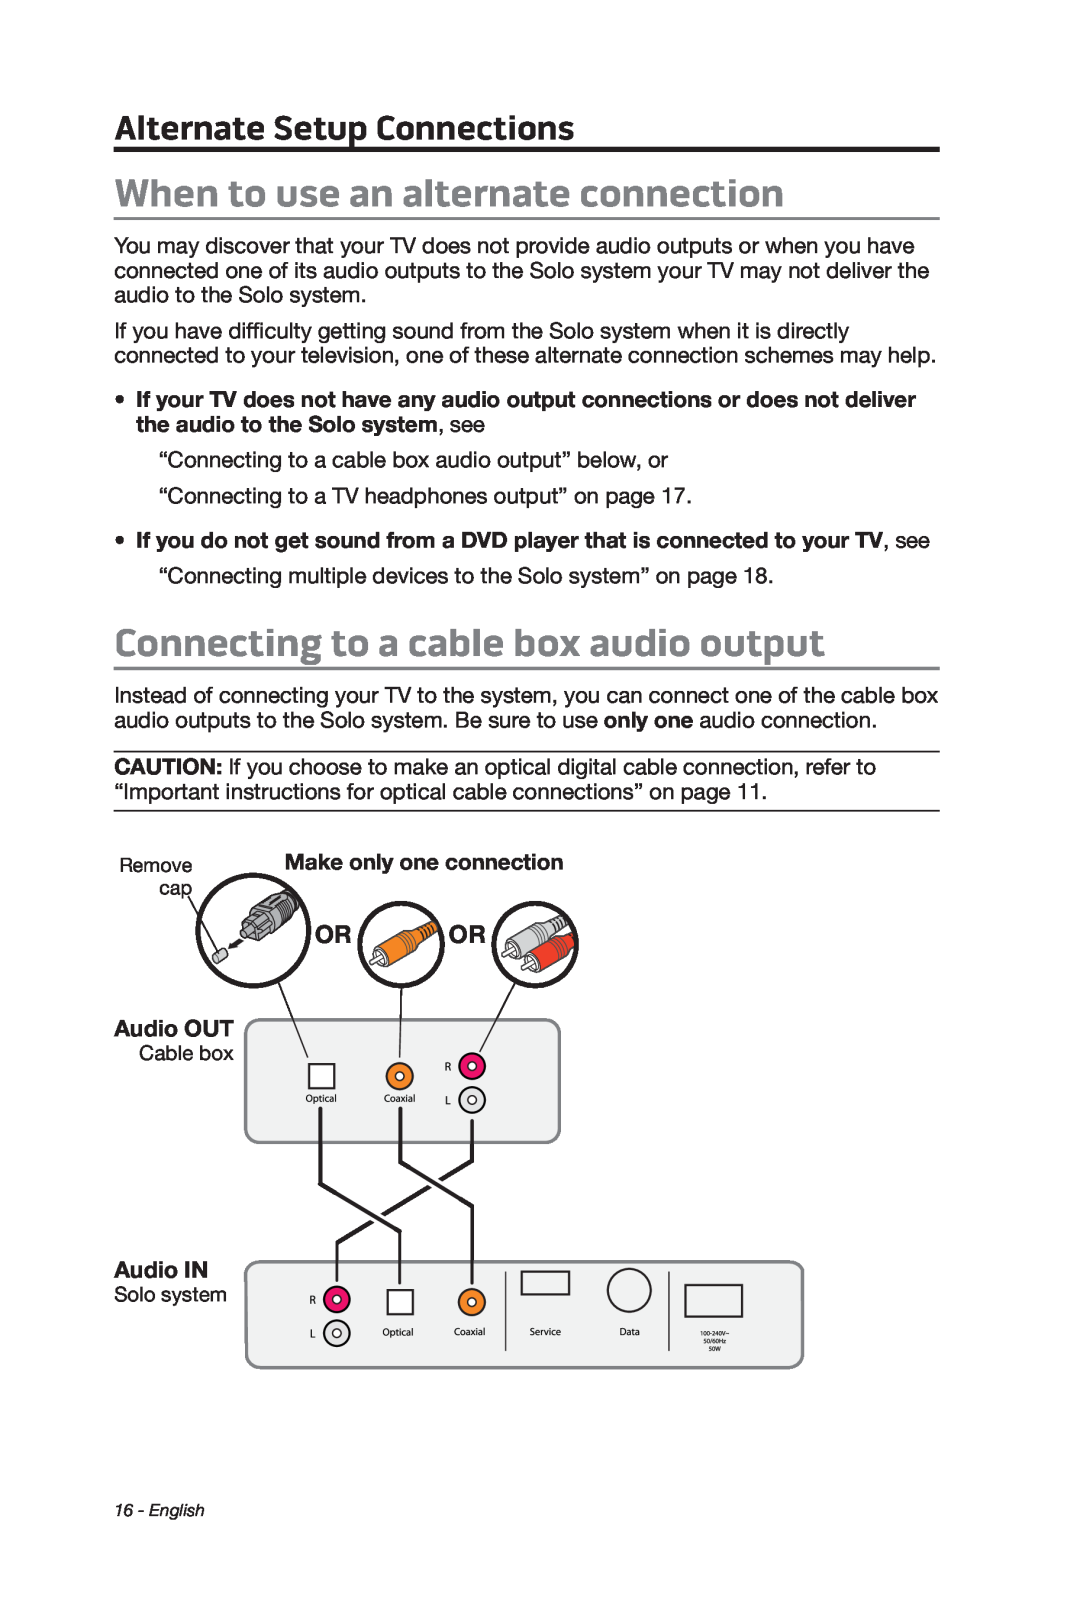 Bose 347205/1300 When to use an alternate connection, Connecting to a cable box audio output, Alternate Setup Connections 